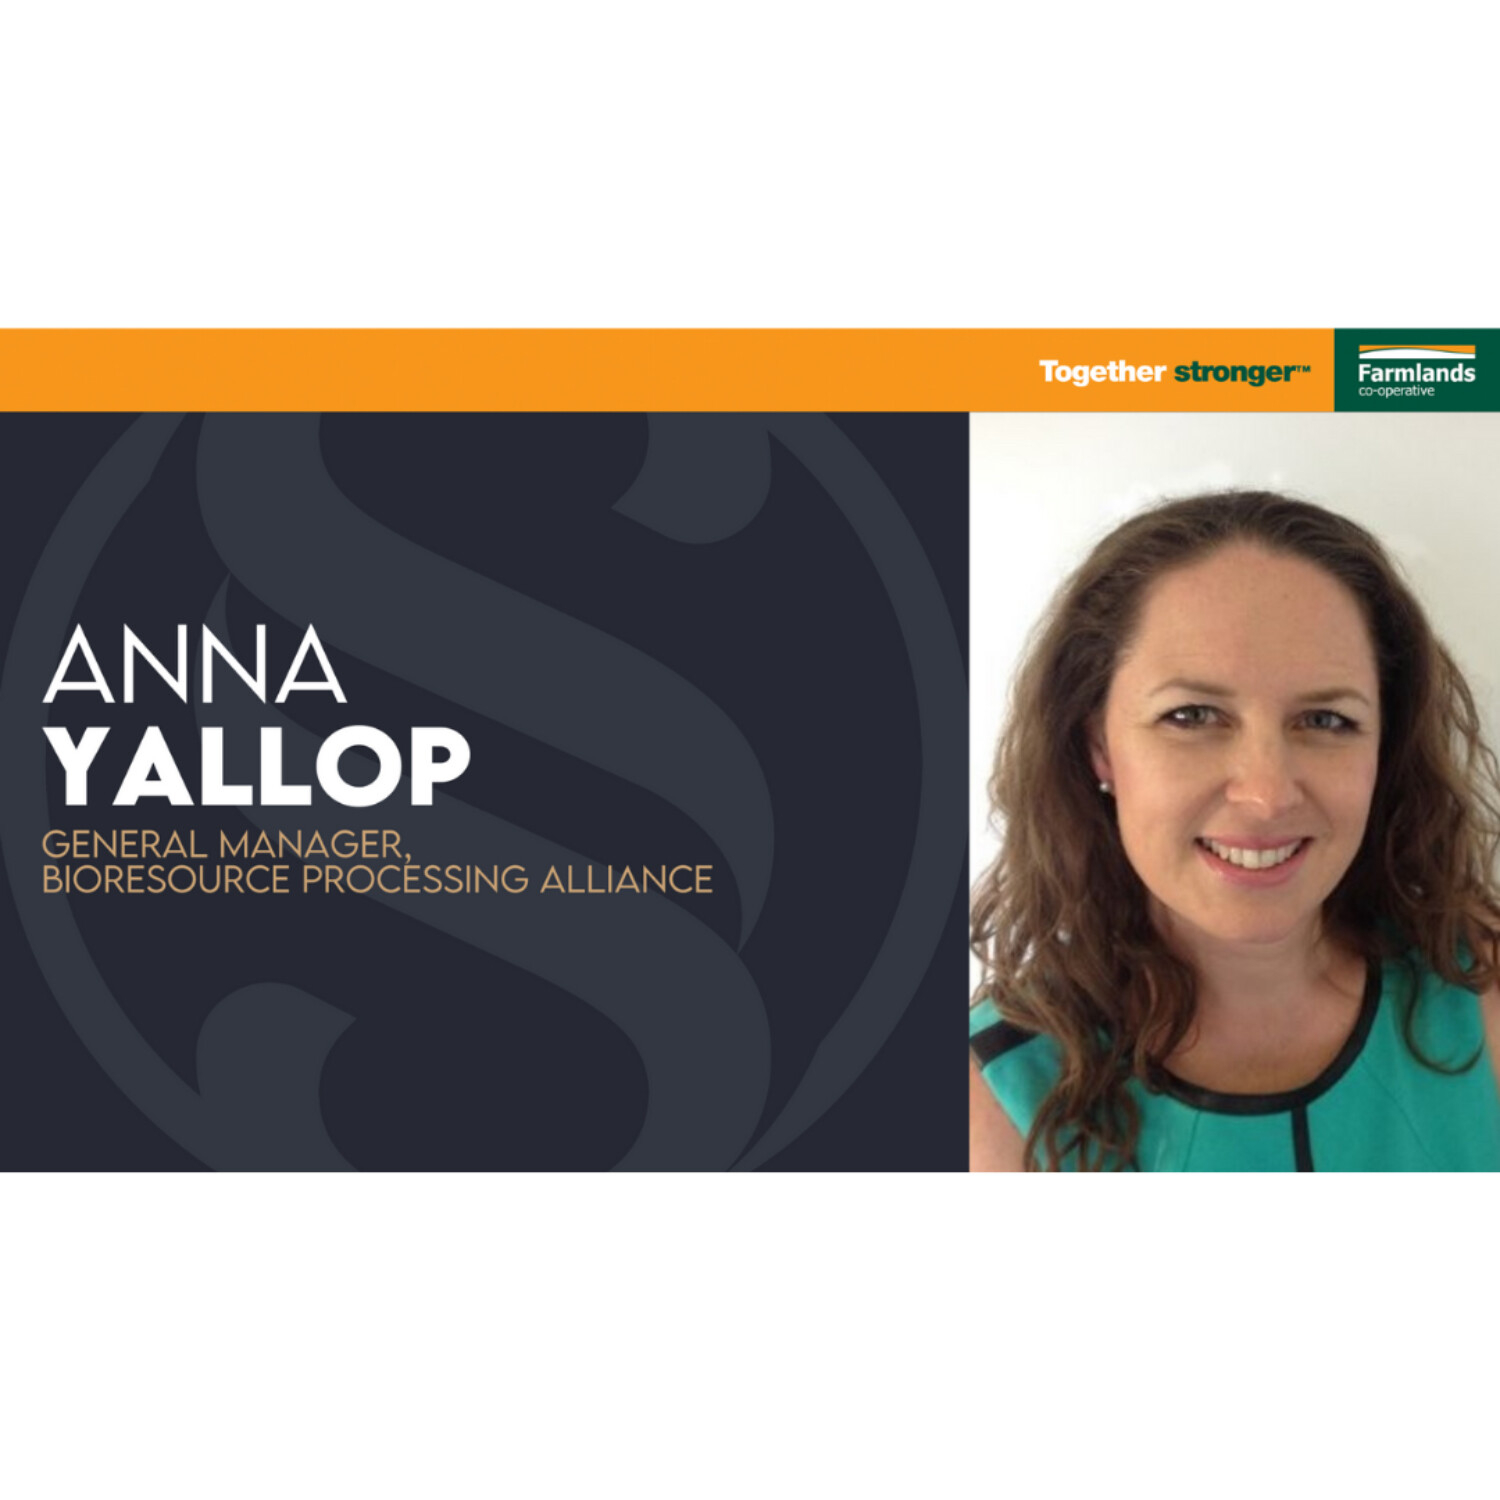 From waste to wealth  | Anna Yallop